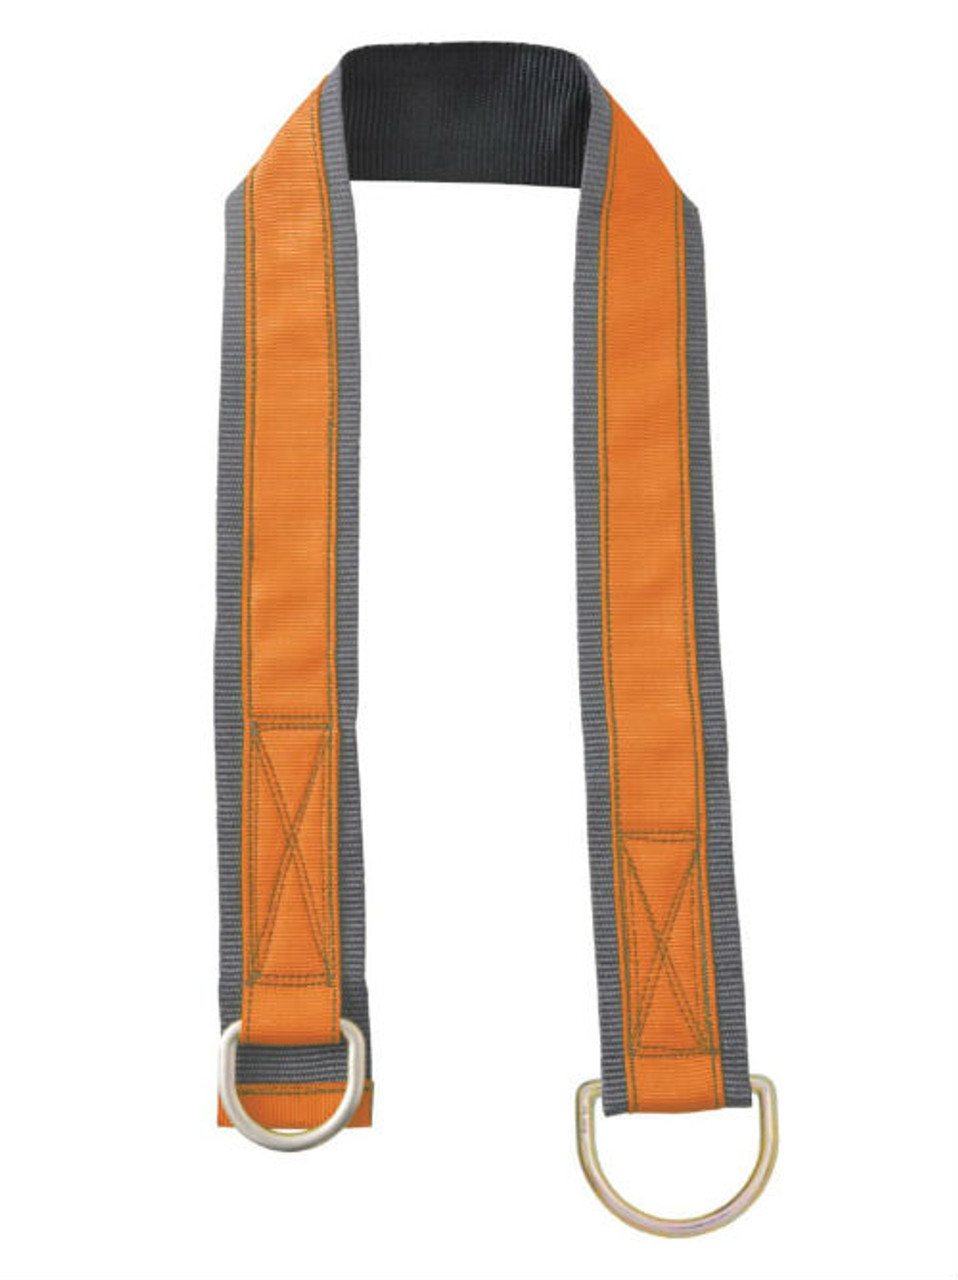 Malta dynamics A6351 6' Cross Arm Strap for fall protection anchorage.